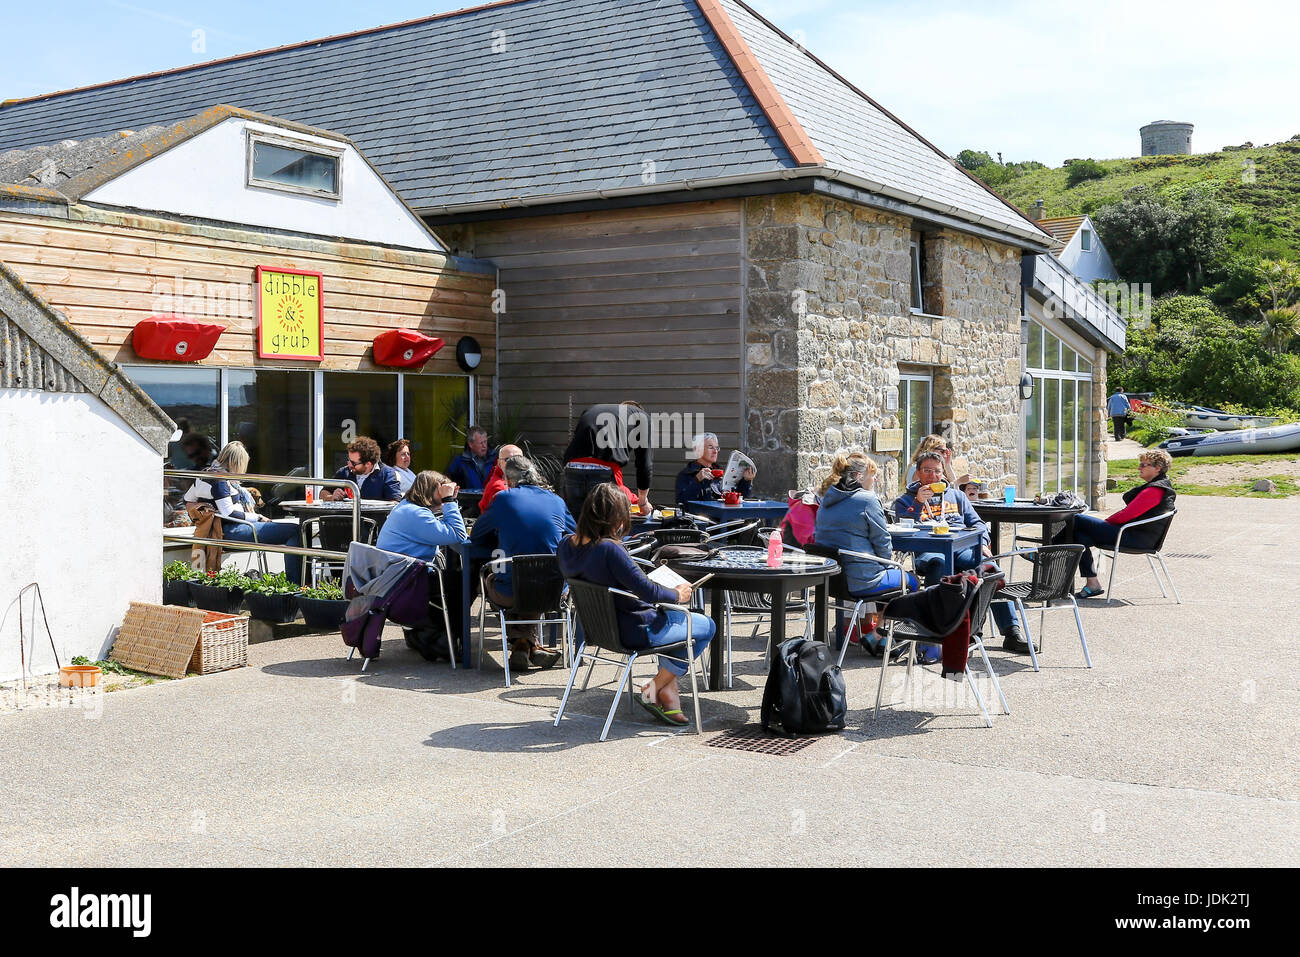 Dibble and Grub cafe on the promenade at St. Mary's, Isles of Scilly, Cornwall, England, UK Stock Photo